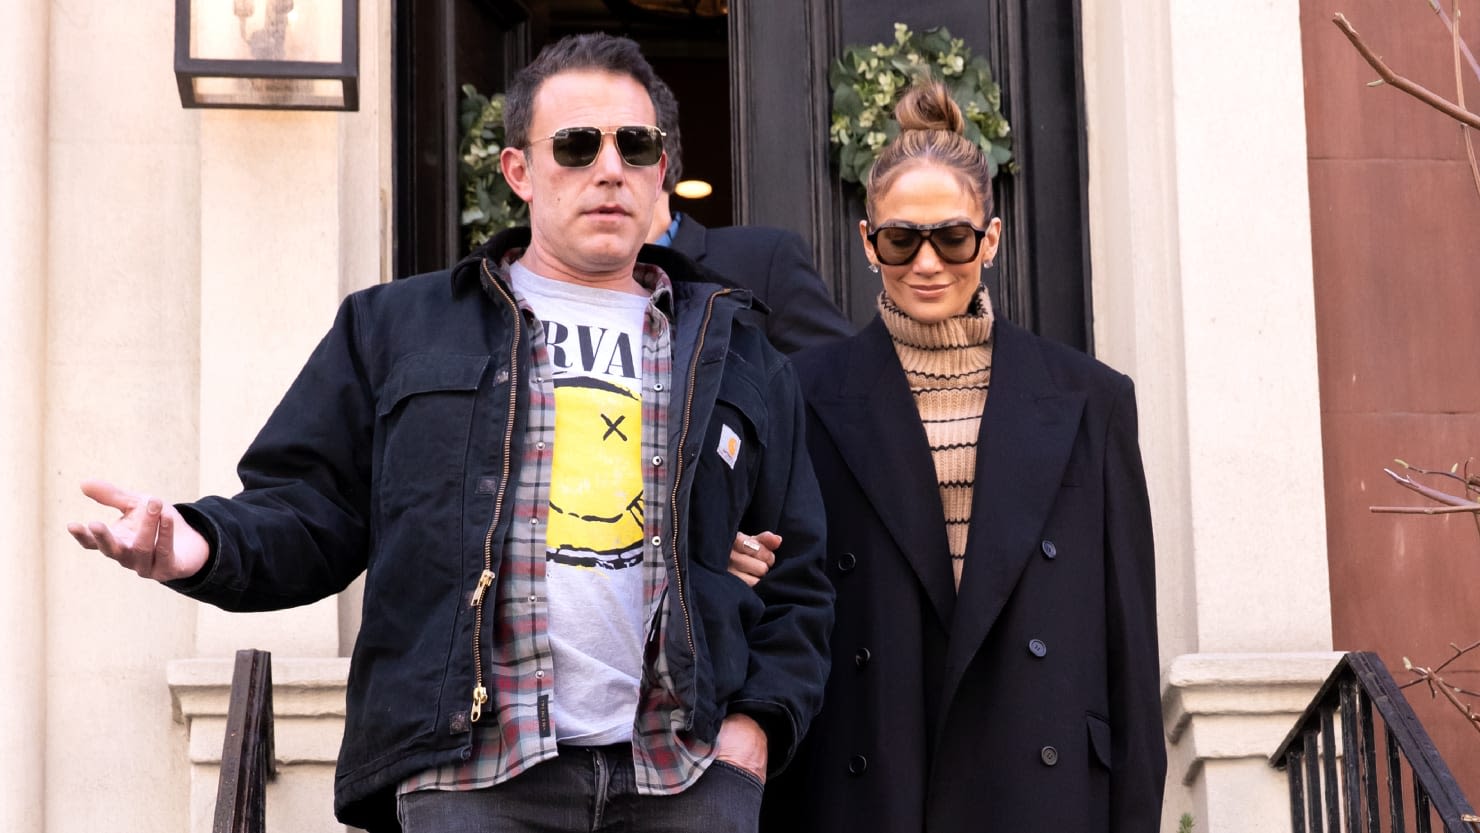 Ben Affleck and J.Lo Are Reportedly Not Even Speaking Anymore